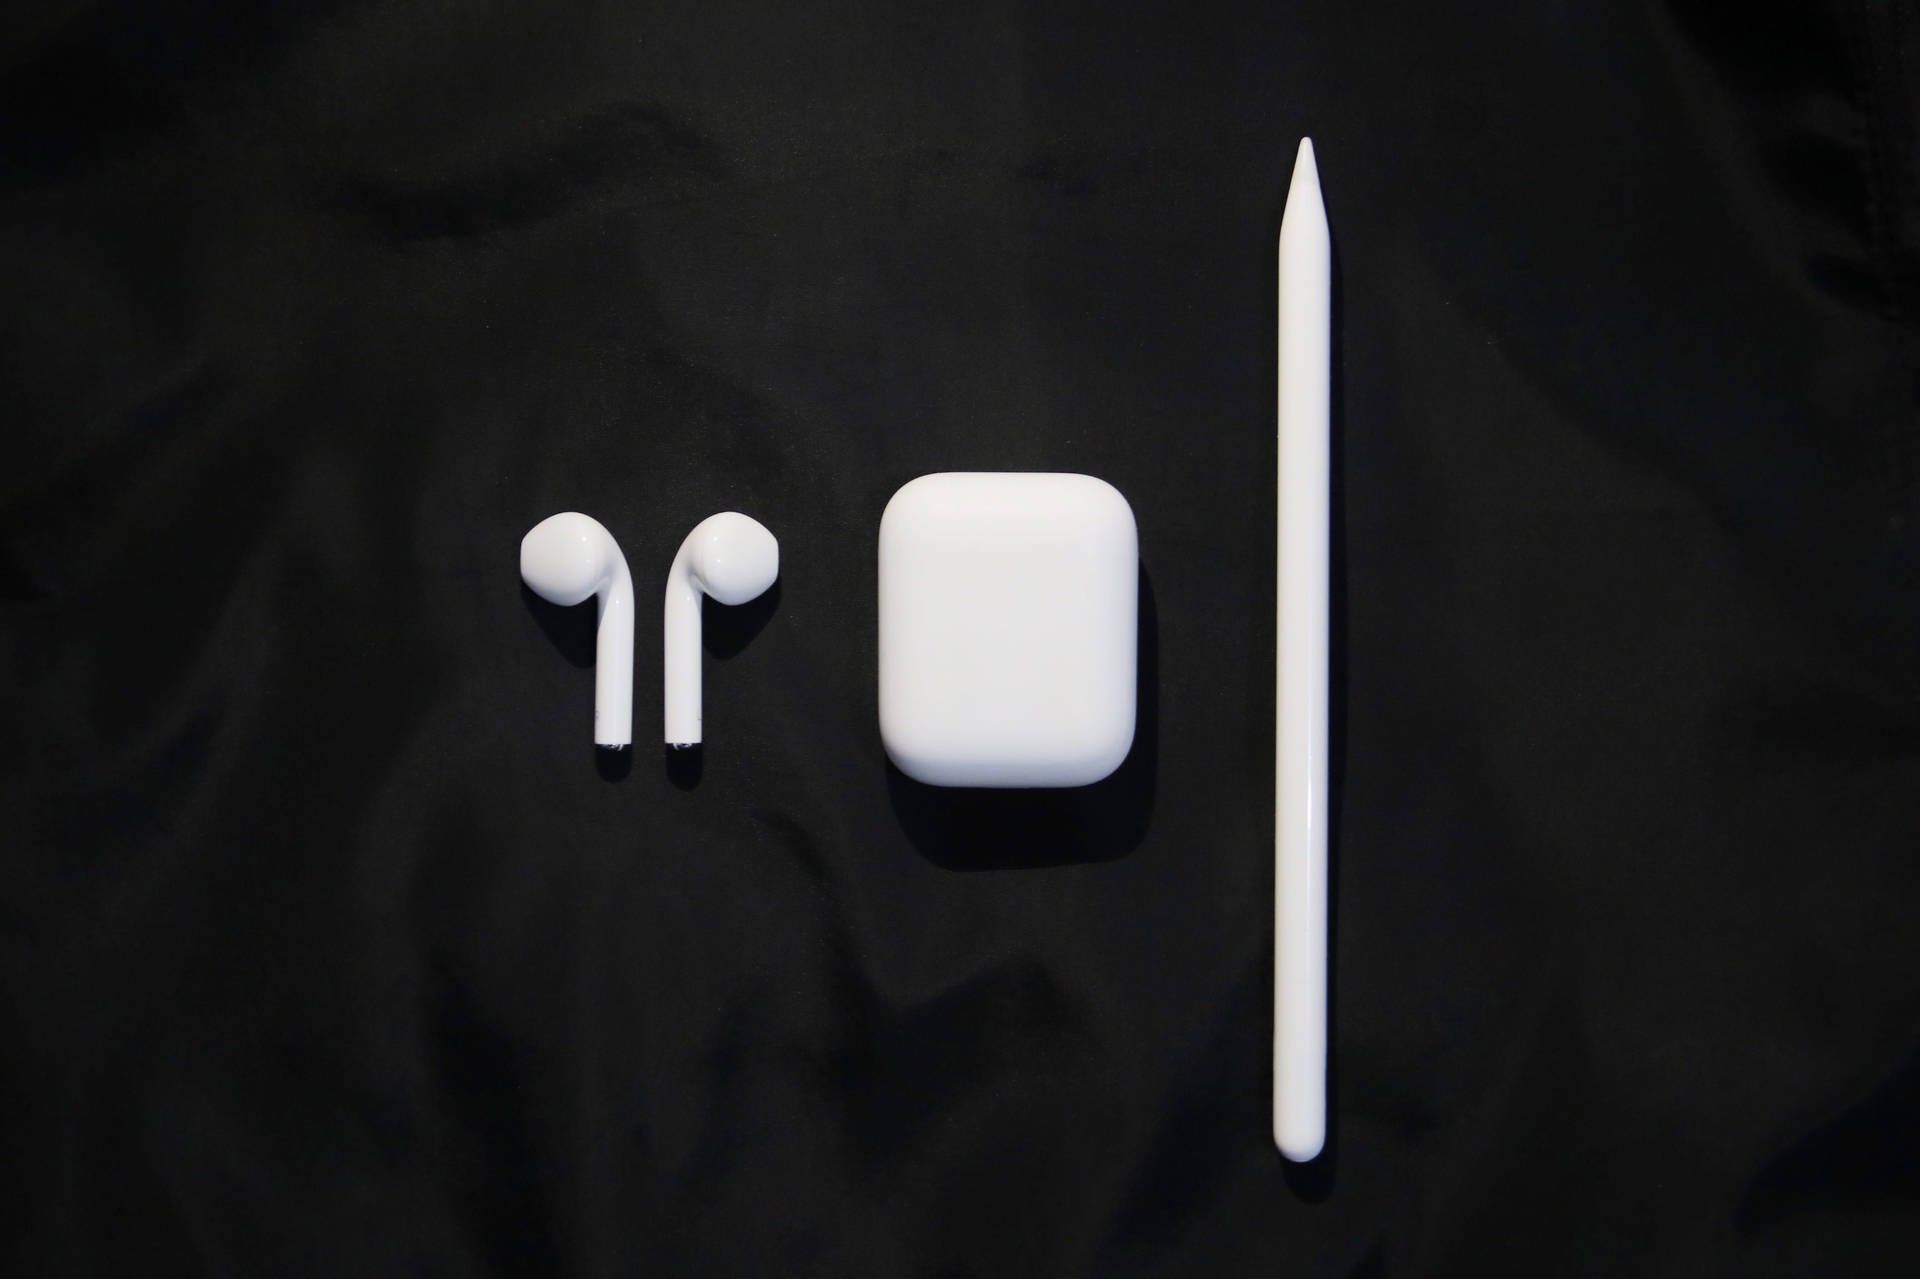 Stylish White Airpods With Accessories Background